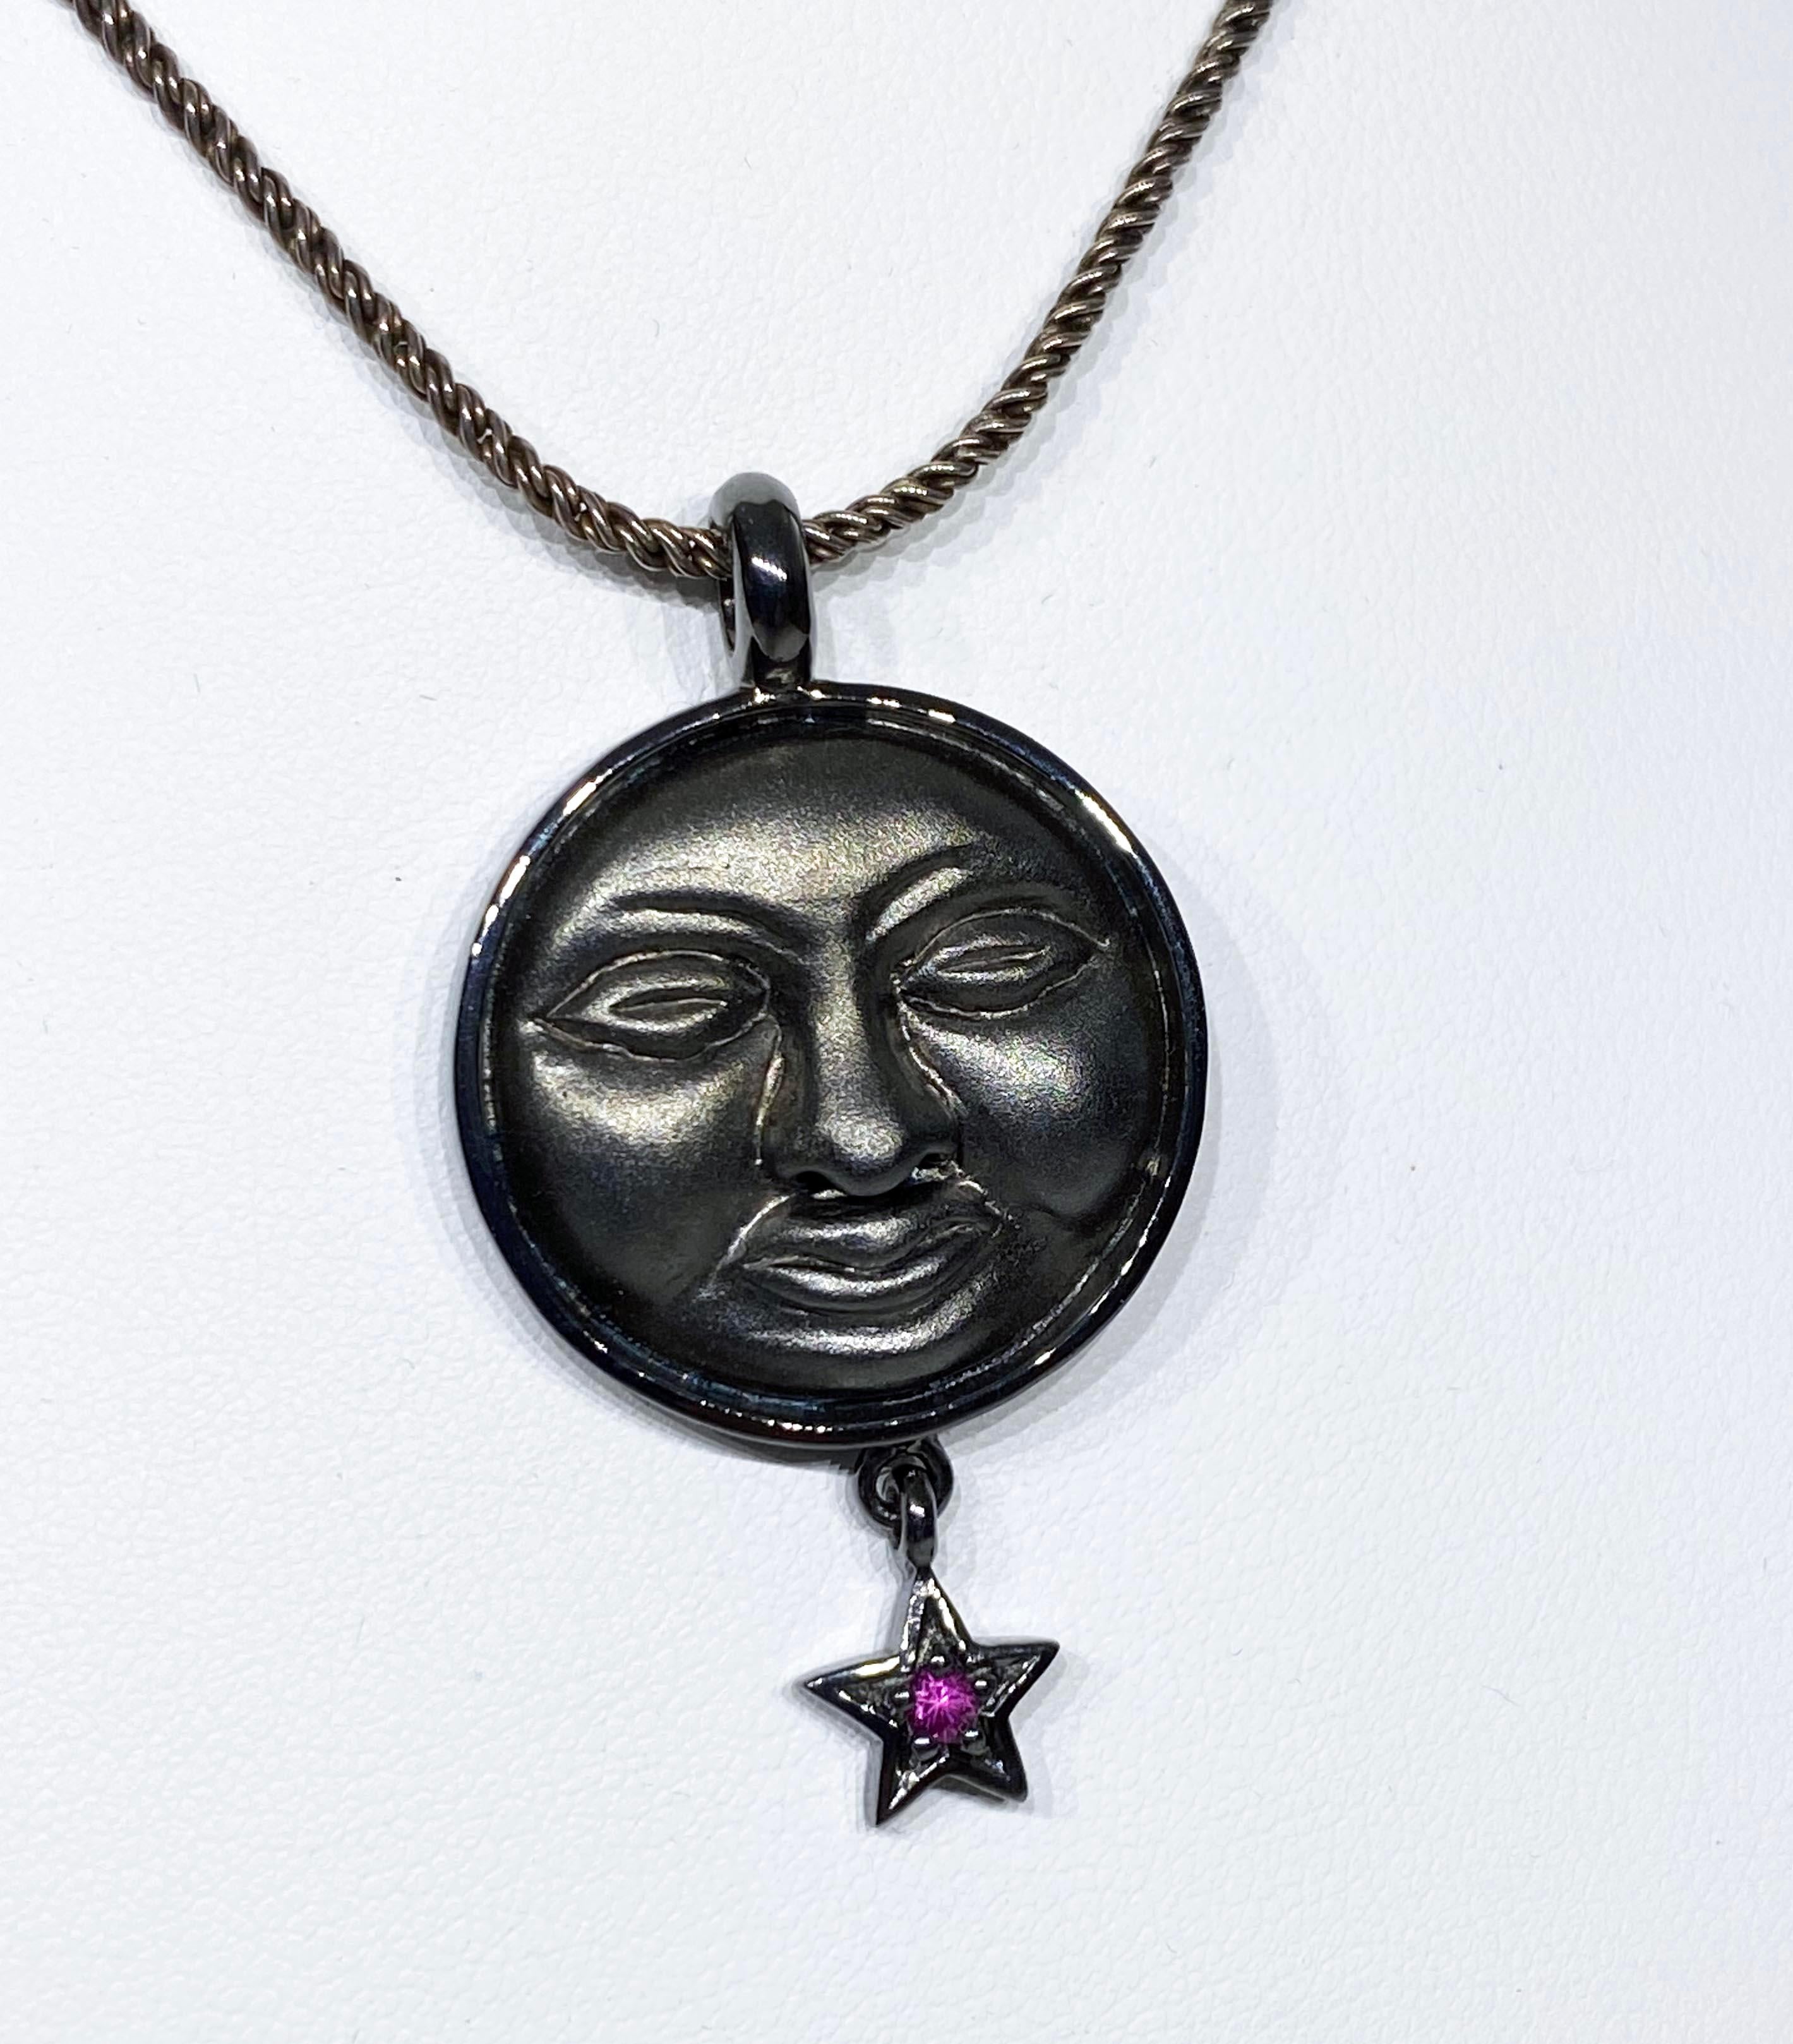 A Blackened Silver Moon Face Pendant
This Blackened Silver Moonface Pendant is is 1.75 inches long and 1 inch wide, This Pendant Slides on a Blackened Silver Chain of 17 Inches. It is acented by a small star dangle set with a Pink Sapphire Round of